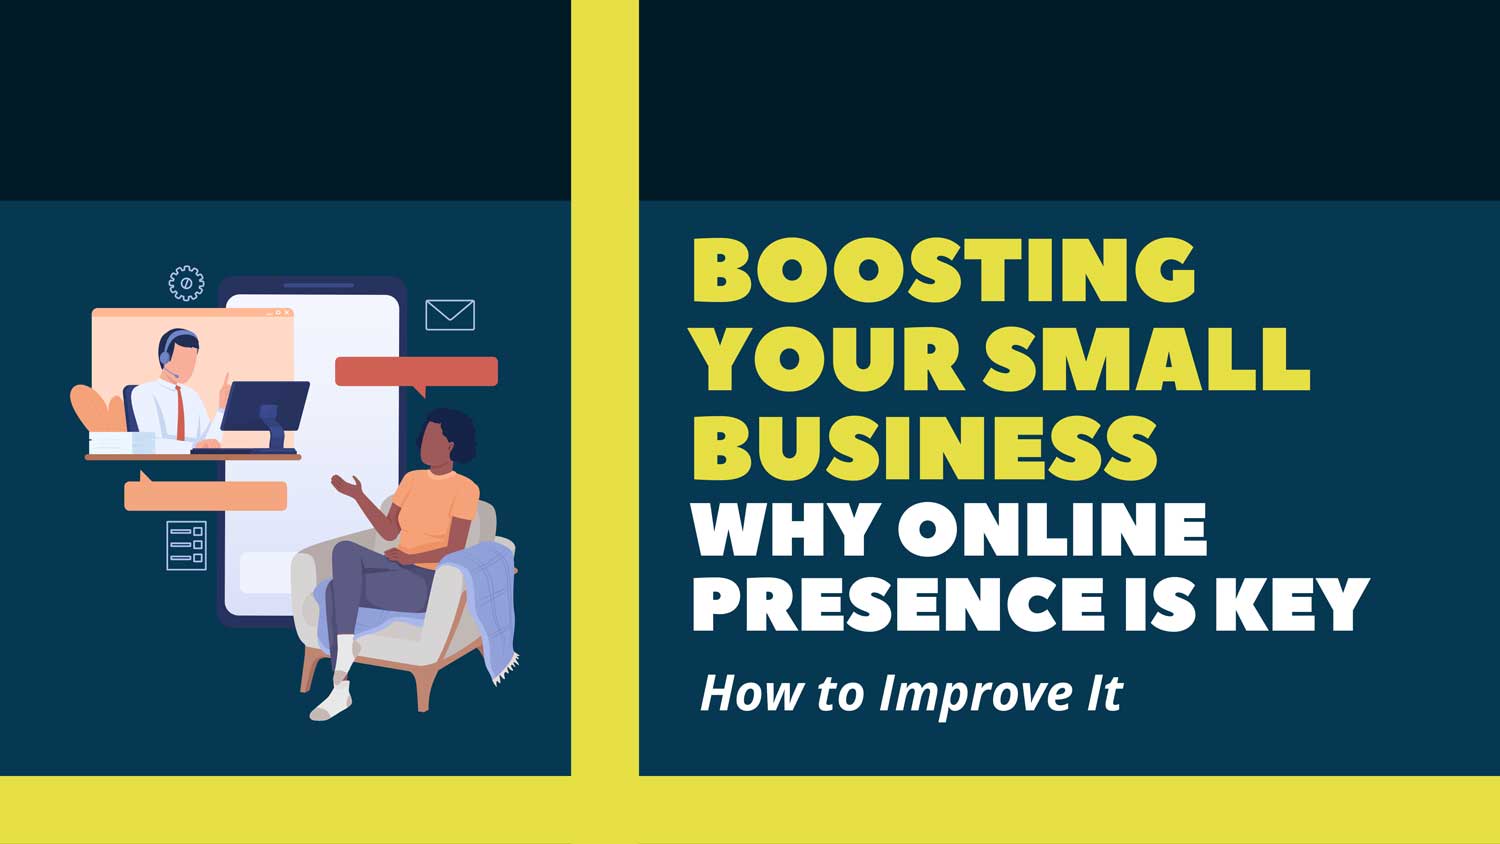 ways to boost your small business featured